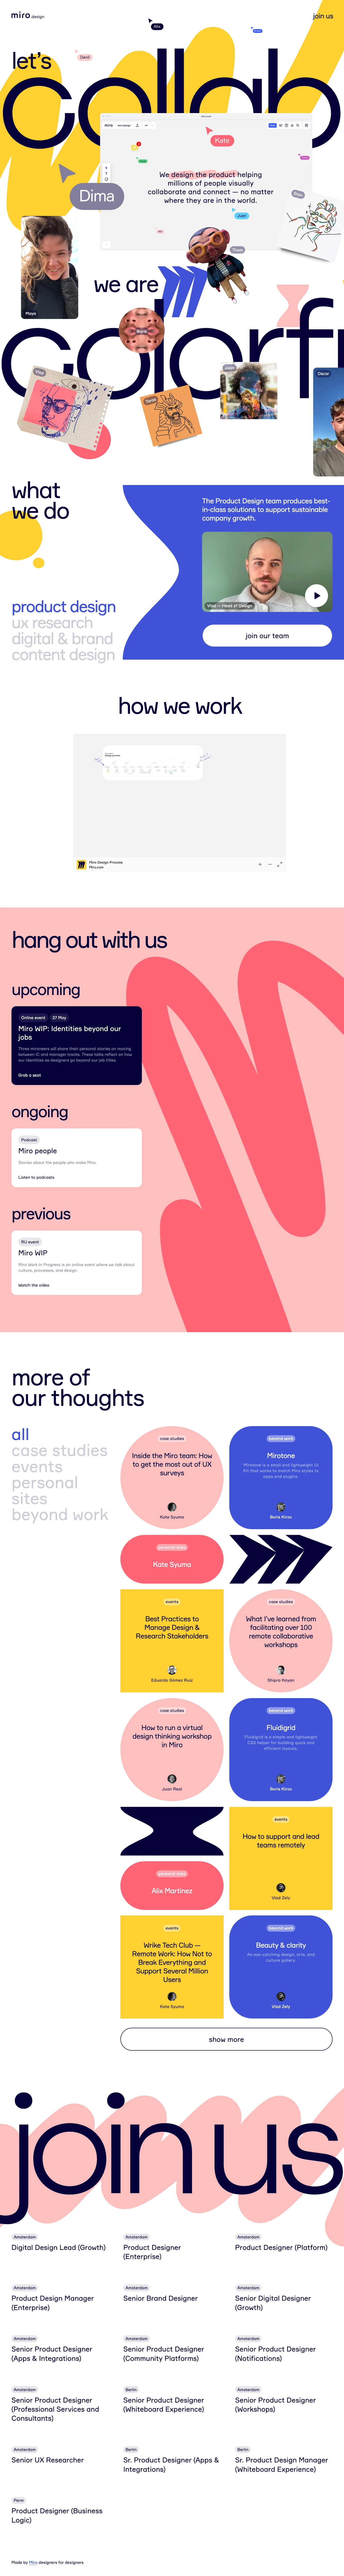 Miro.design Landing Page Example: We design the product helping millions of people visually collaborate and connect — no matter where they are in the world.